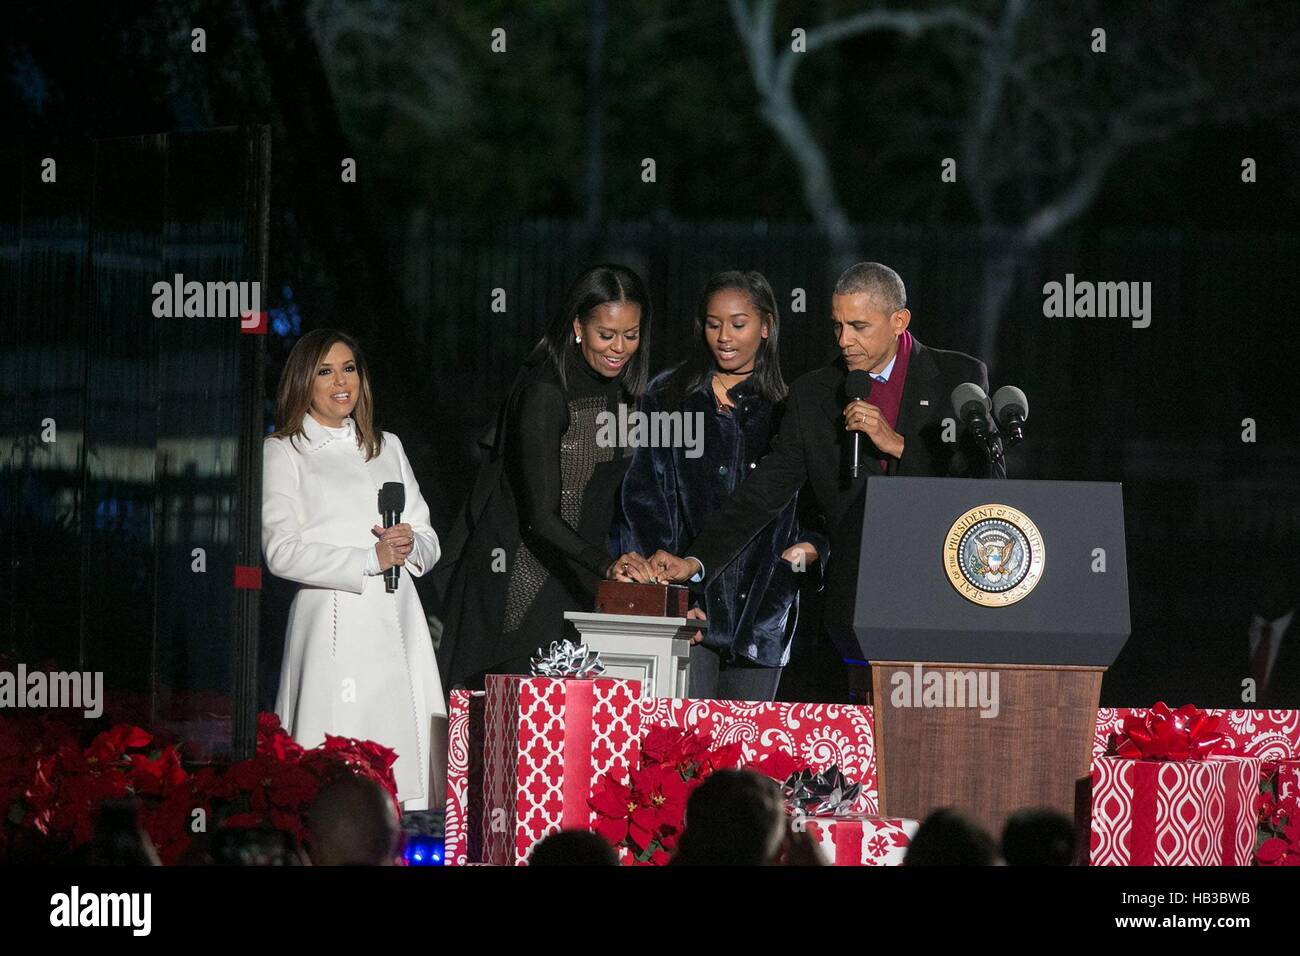 U.S President Barack Obama , First Lady Michelle Obama and daughter Sasha push the button to light the national Christmas tree as host Eva Longoria looks on at the Ellipse December 1, 2016 in Washington, DC. Stock Photo